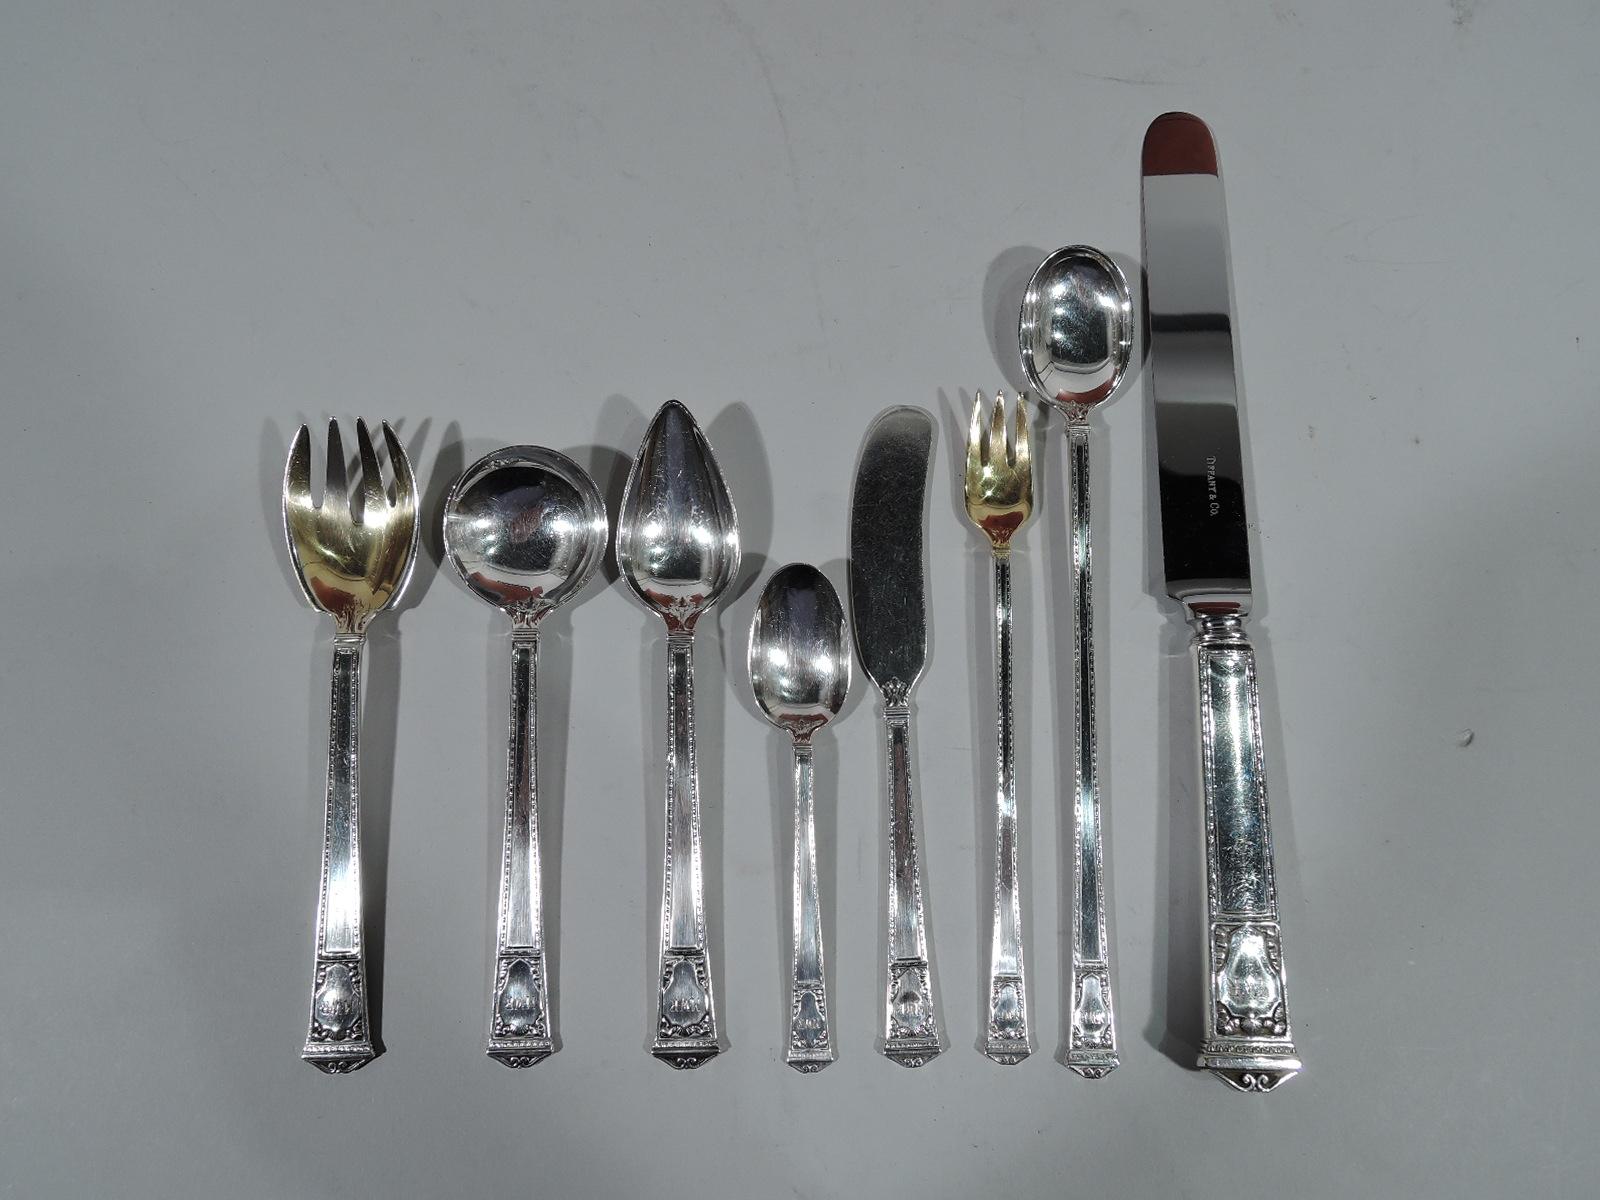 Sterling silver dinner and luncheon set for 12 in San Lorenzo pattern. Made by Tiffany & Co. in New York.

This set comprises 170 pieces (dimensions in inches): Forks: 12 dinner forks (7 3/4), 12 luncheon forks (7), 12 salad forks (6 7/8), 12